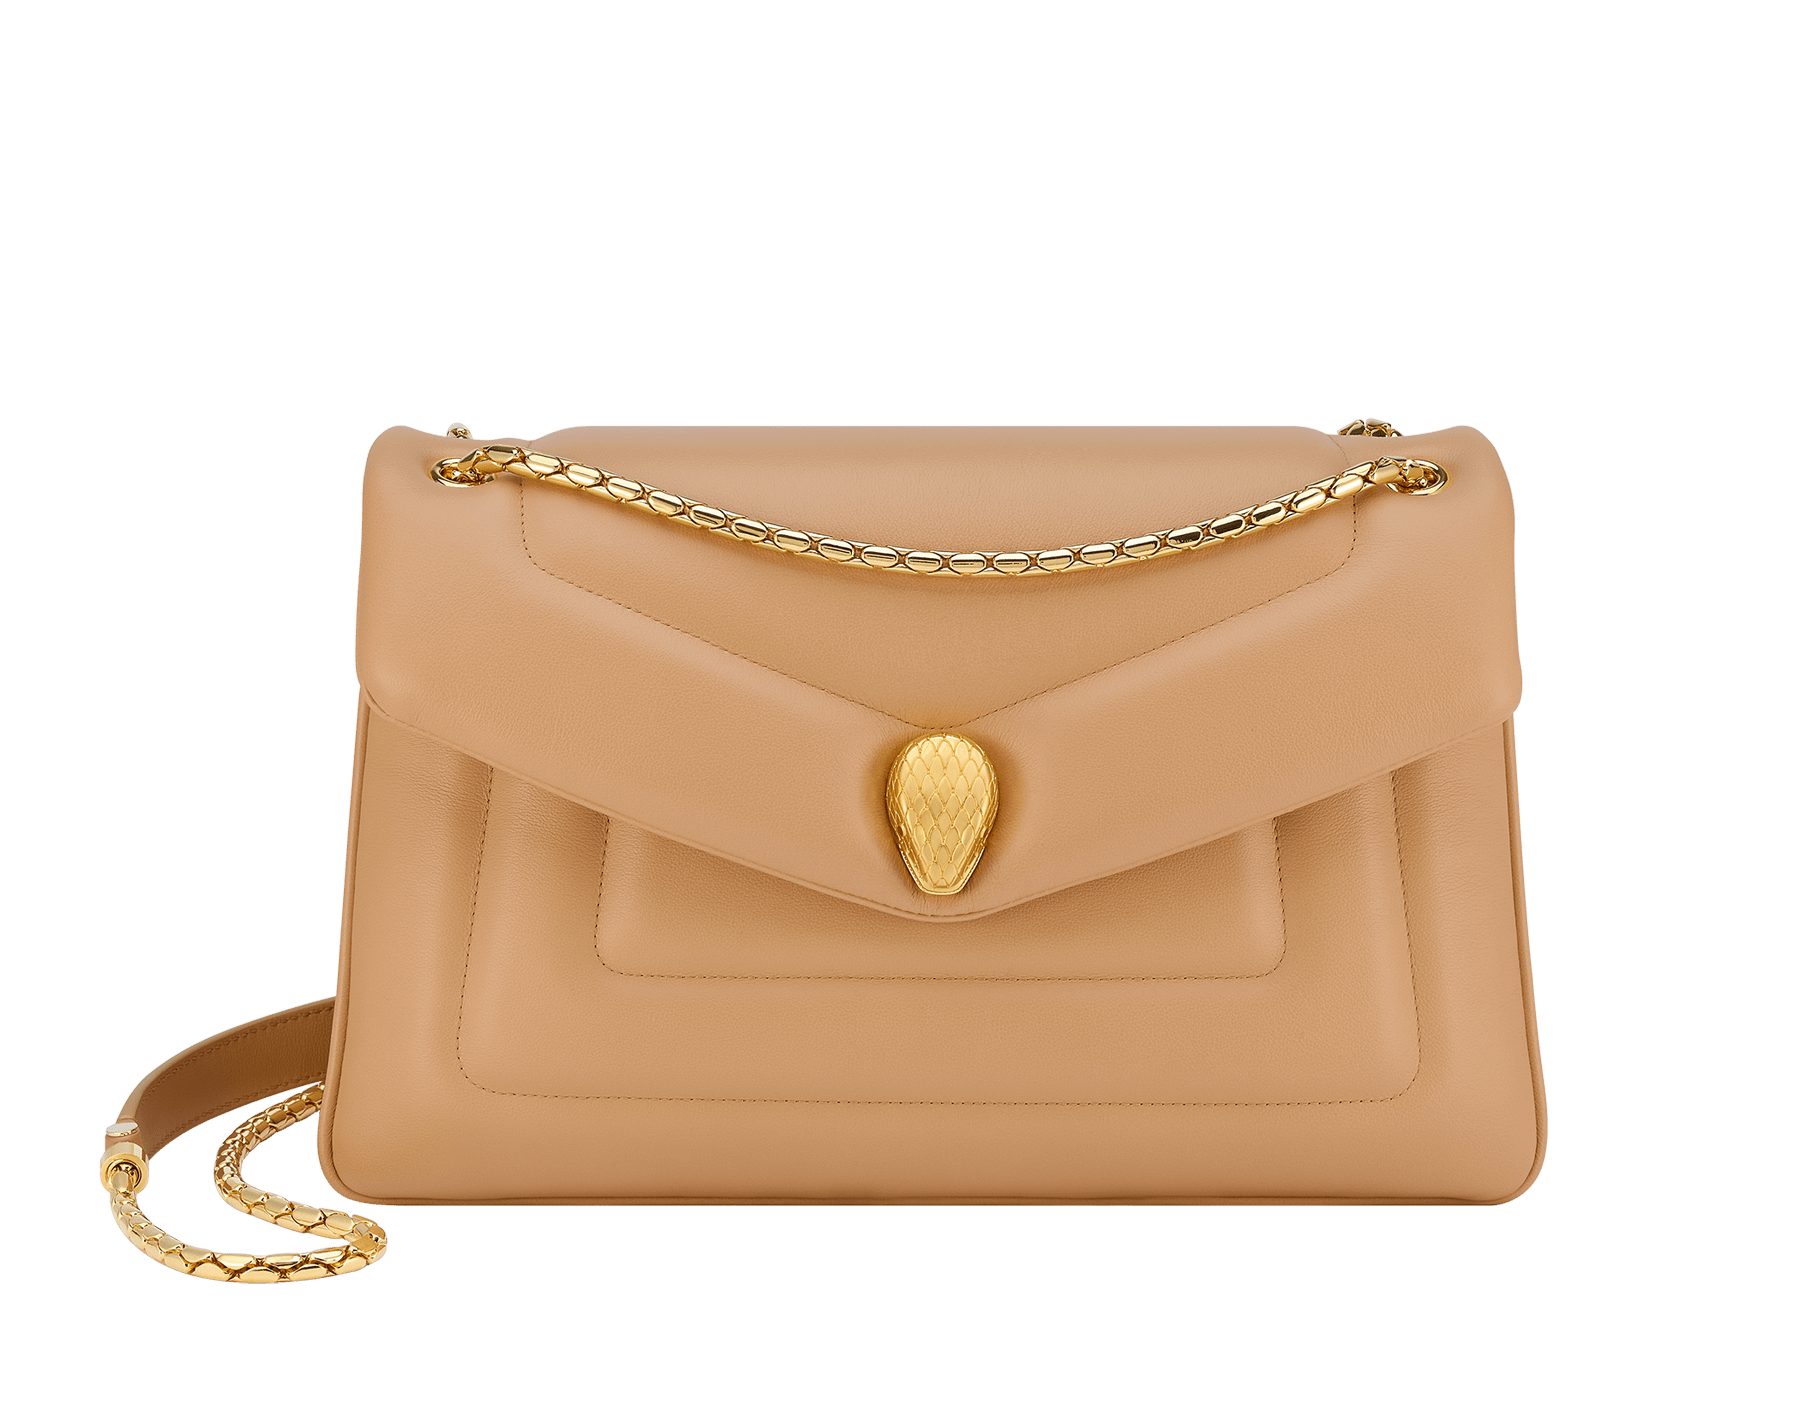 Serpenti Reverse medium shoulder bag in Sahara amber light brown quilted Metropolitan calf leather with taffy quartz pink nappa leather lining. Captivating snakehead magnetic closure in gold-plated brass embellished with red enamel eyes. 1223-MCL image 1